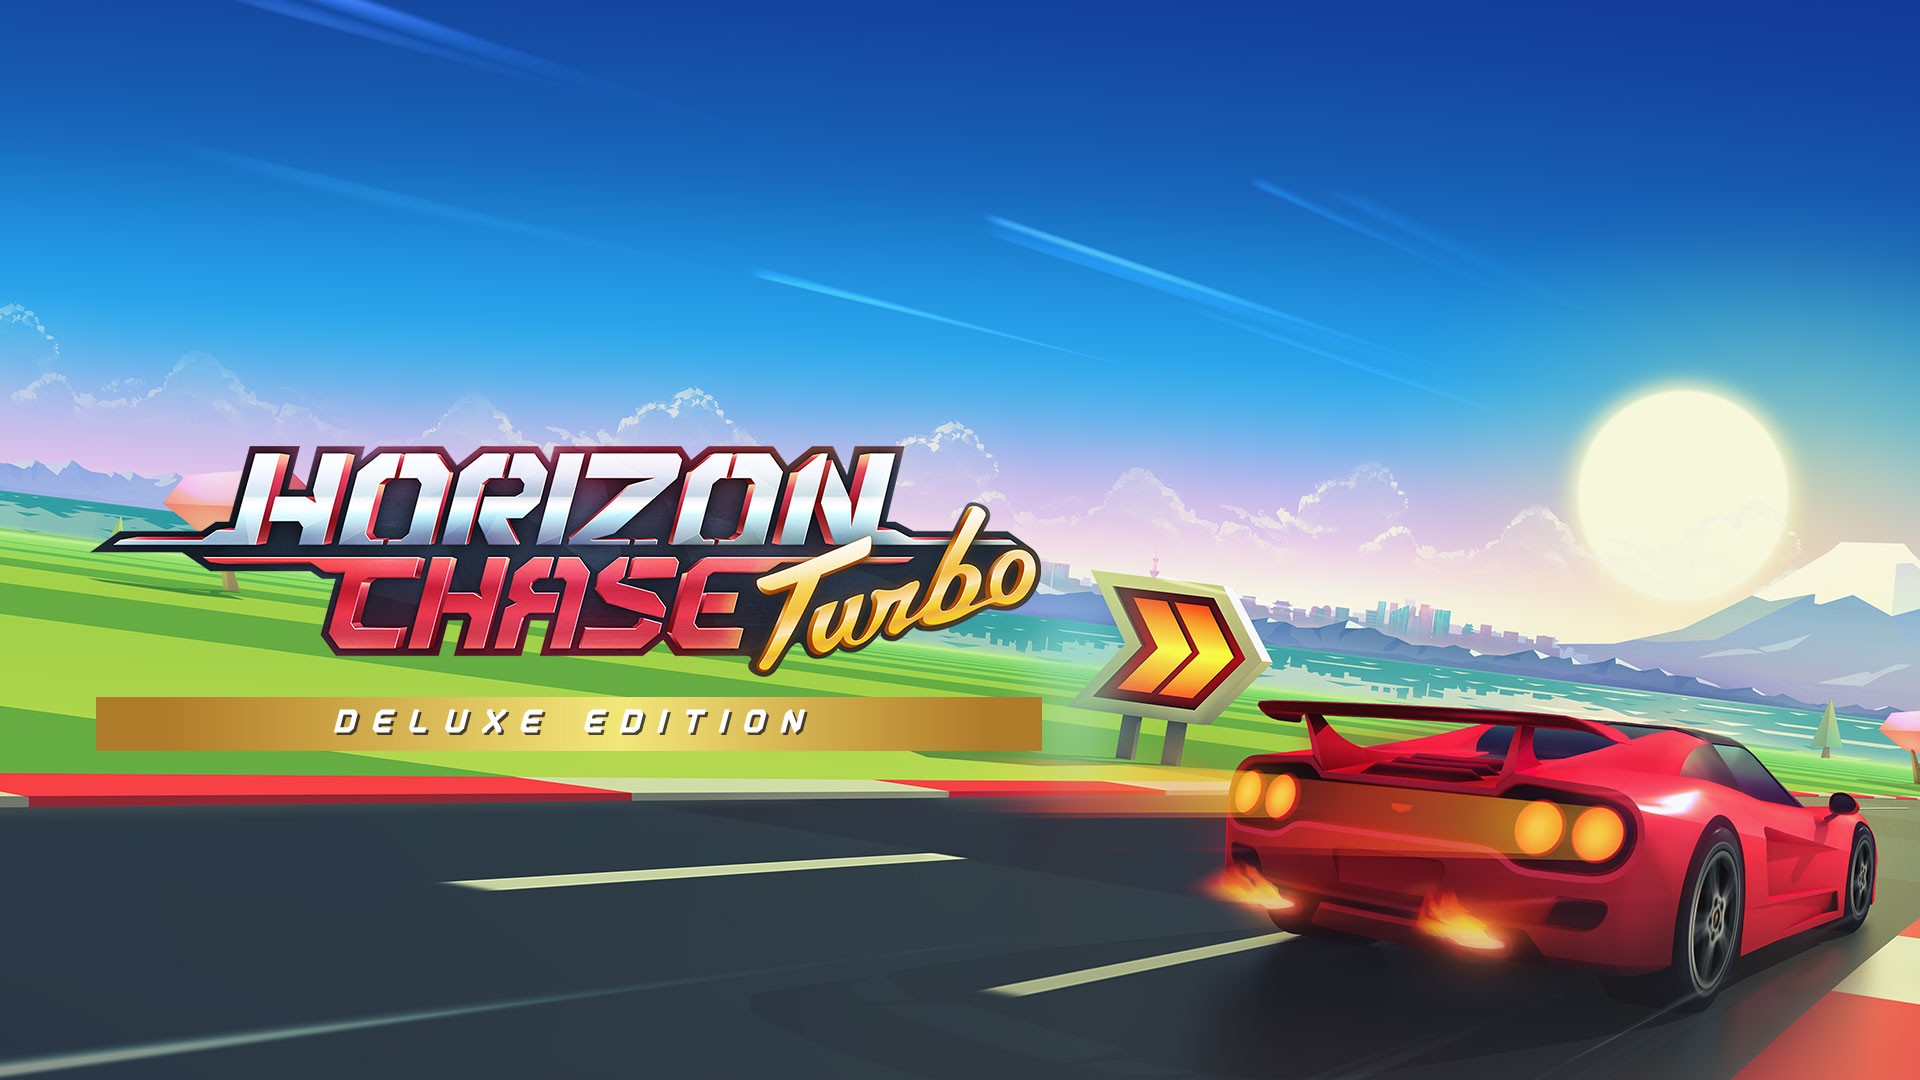 Retro Chase Action! HORIZON CHASE TURBO Deluxe Edition to PS4 (SEA) this July